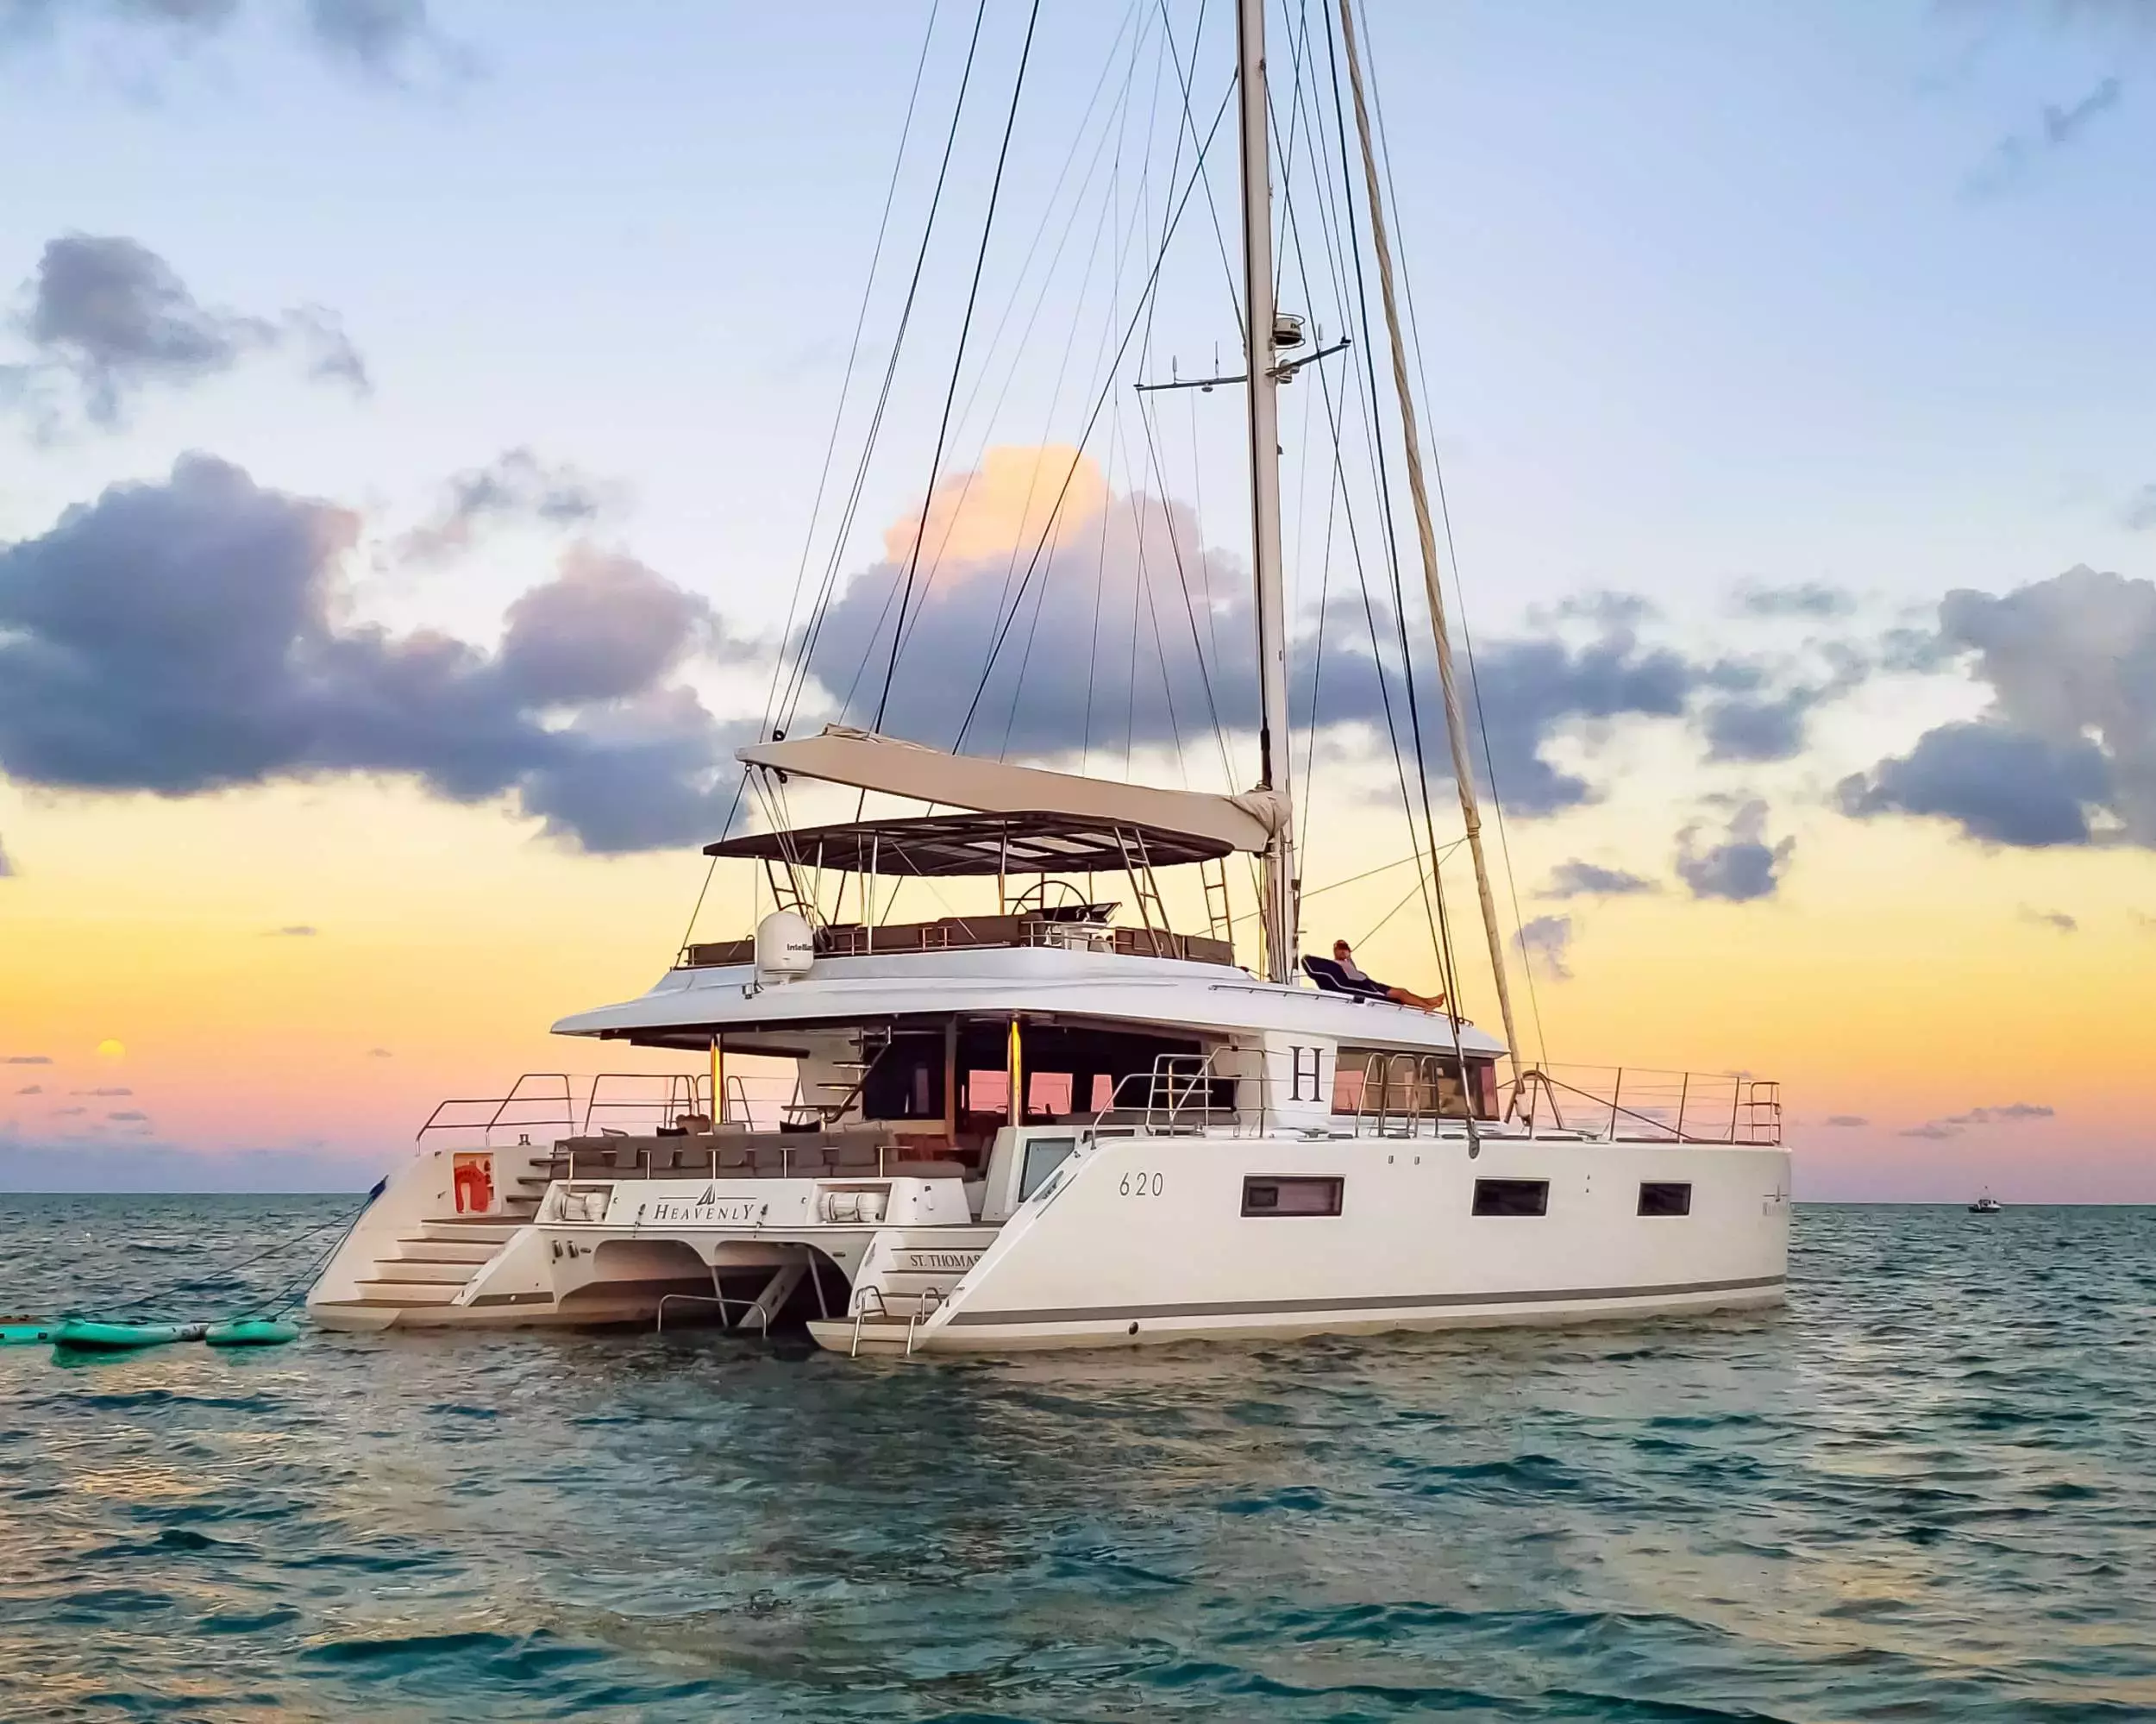 Heavenly by Lagoon - Special Offer for a private Sailing Catamaran Rental in Tortola with a crew